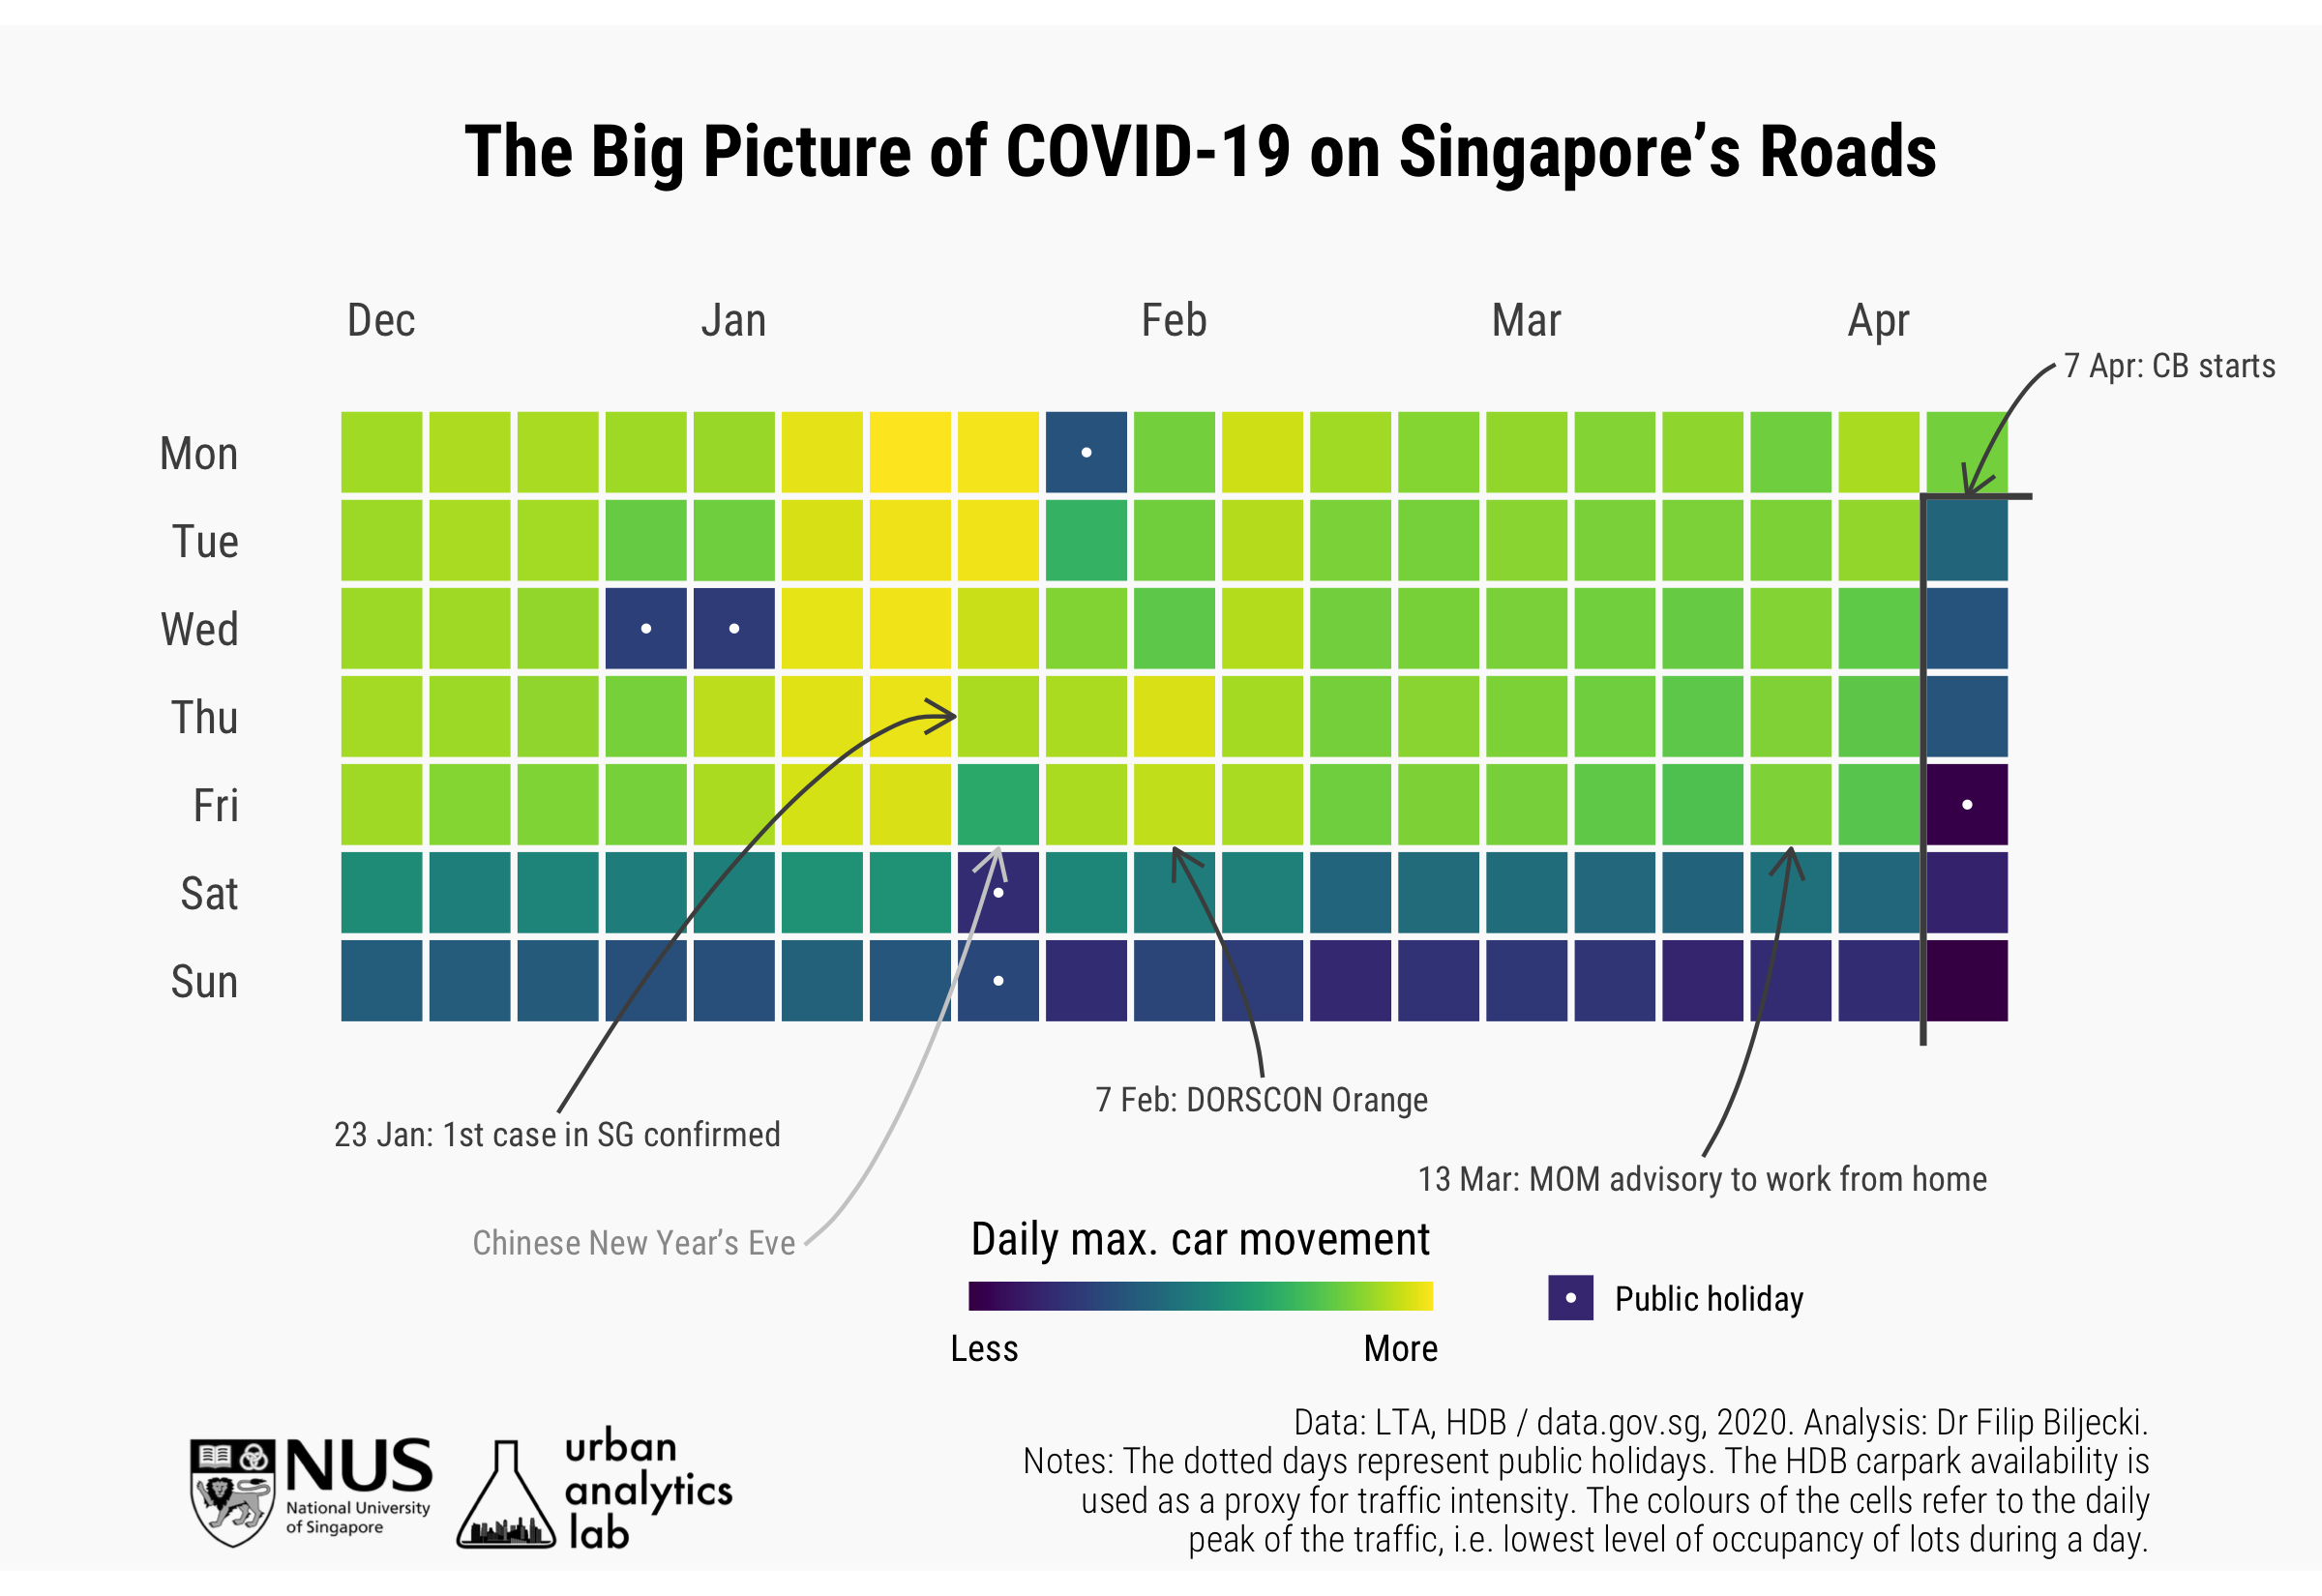 Singapore's urban data affirms the compliance with the Circuit Breaker